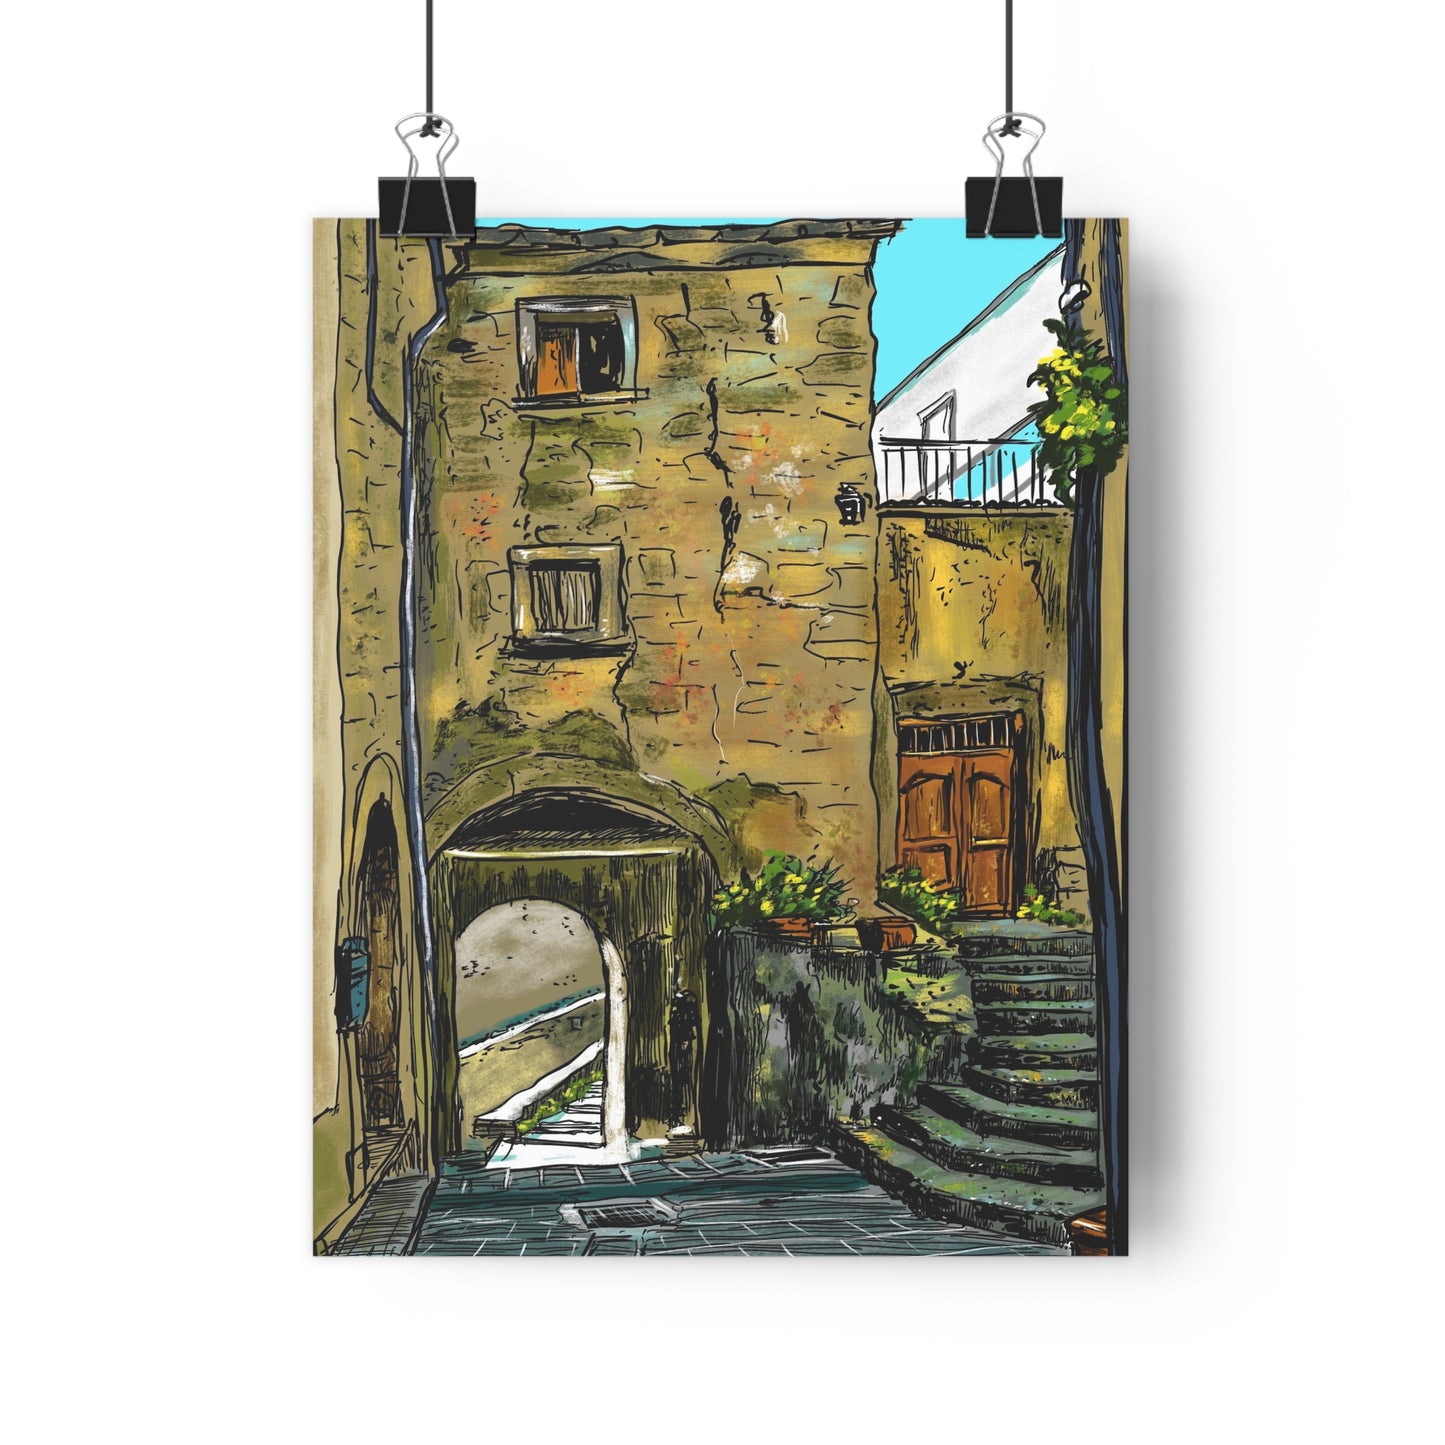 A Street in Bomba, Italy - Premium Poster